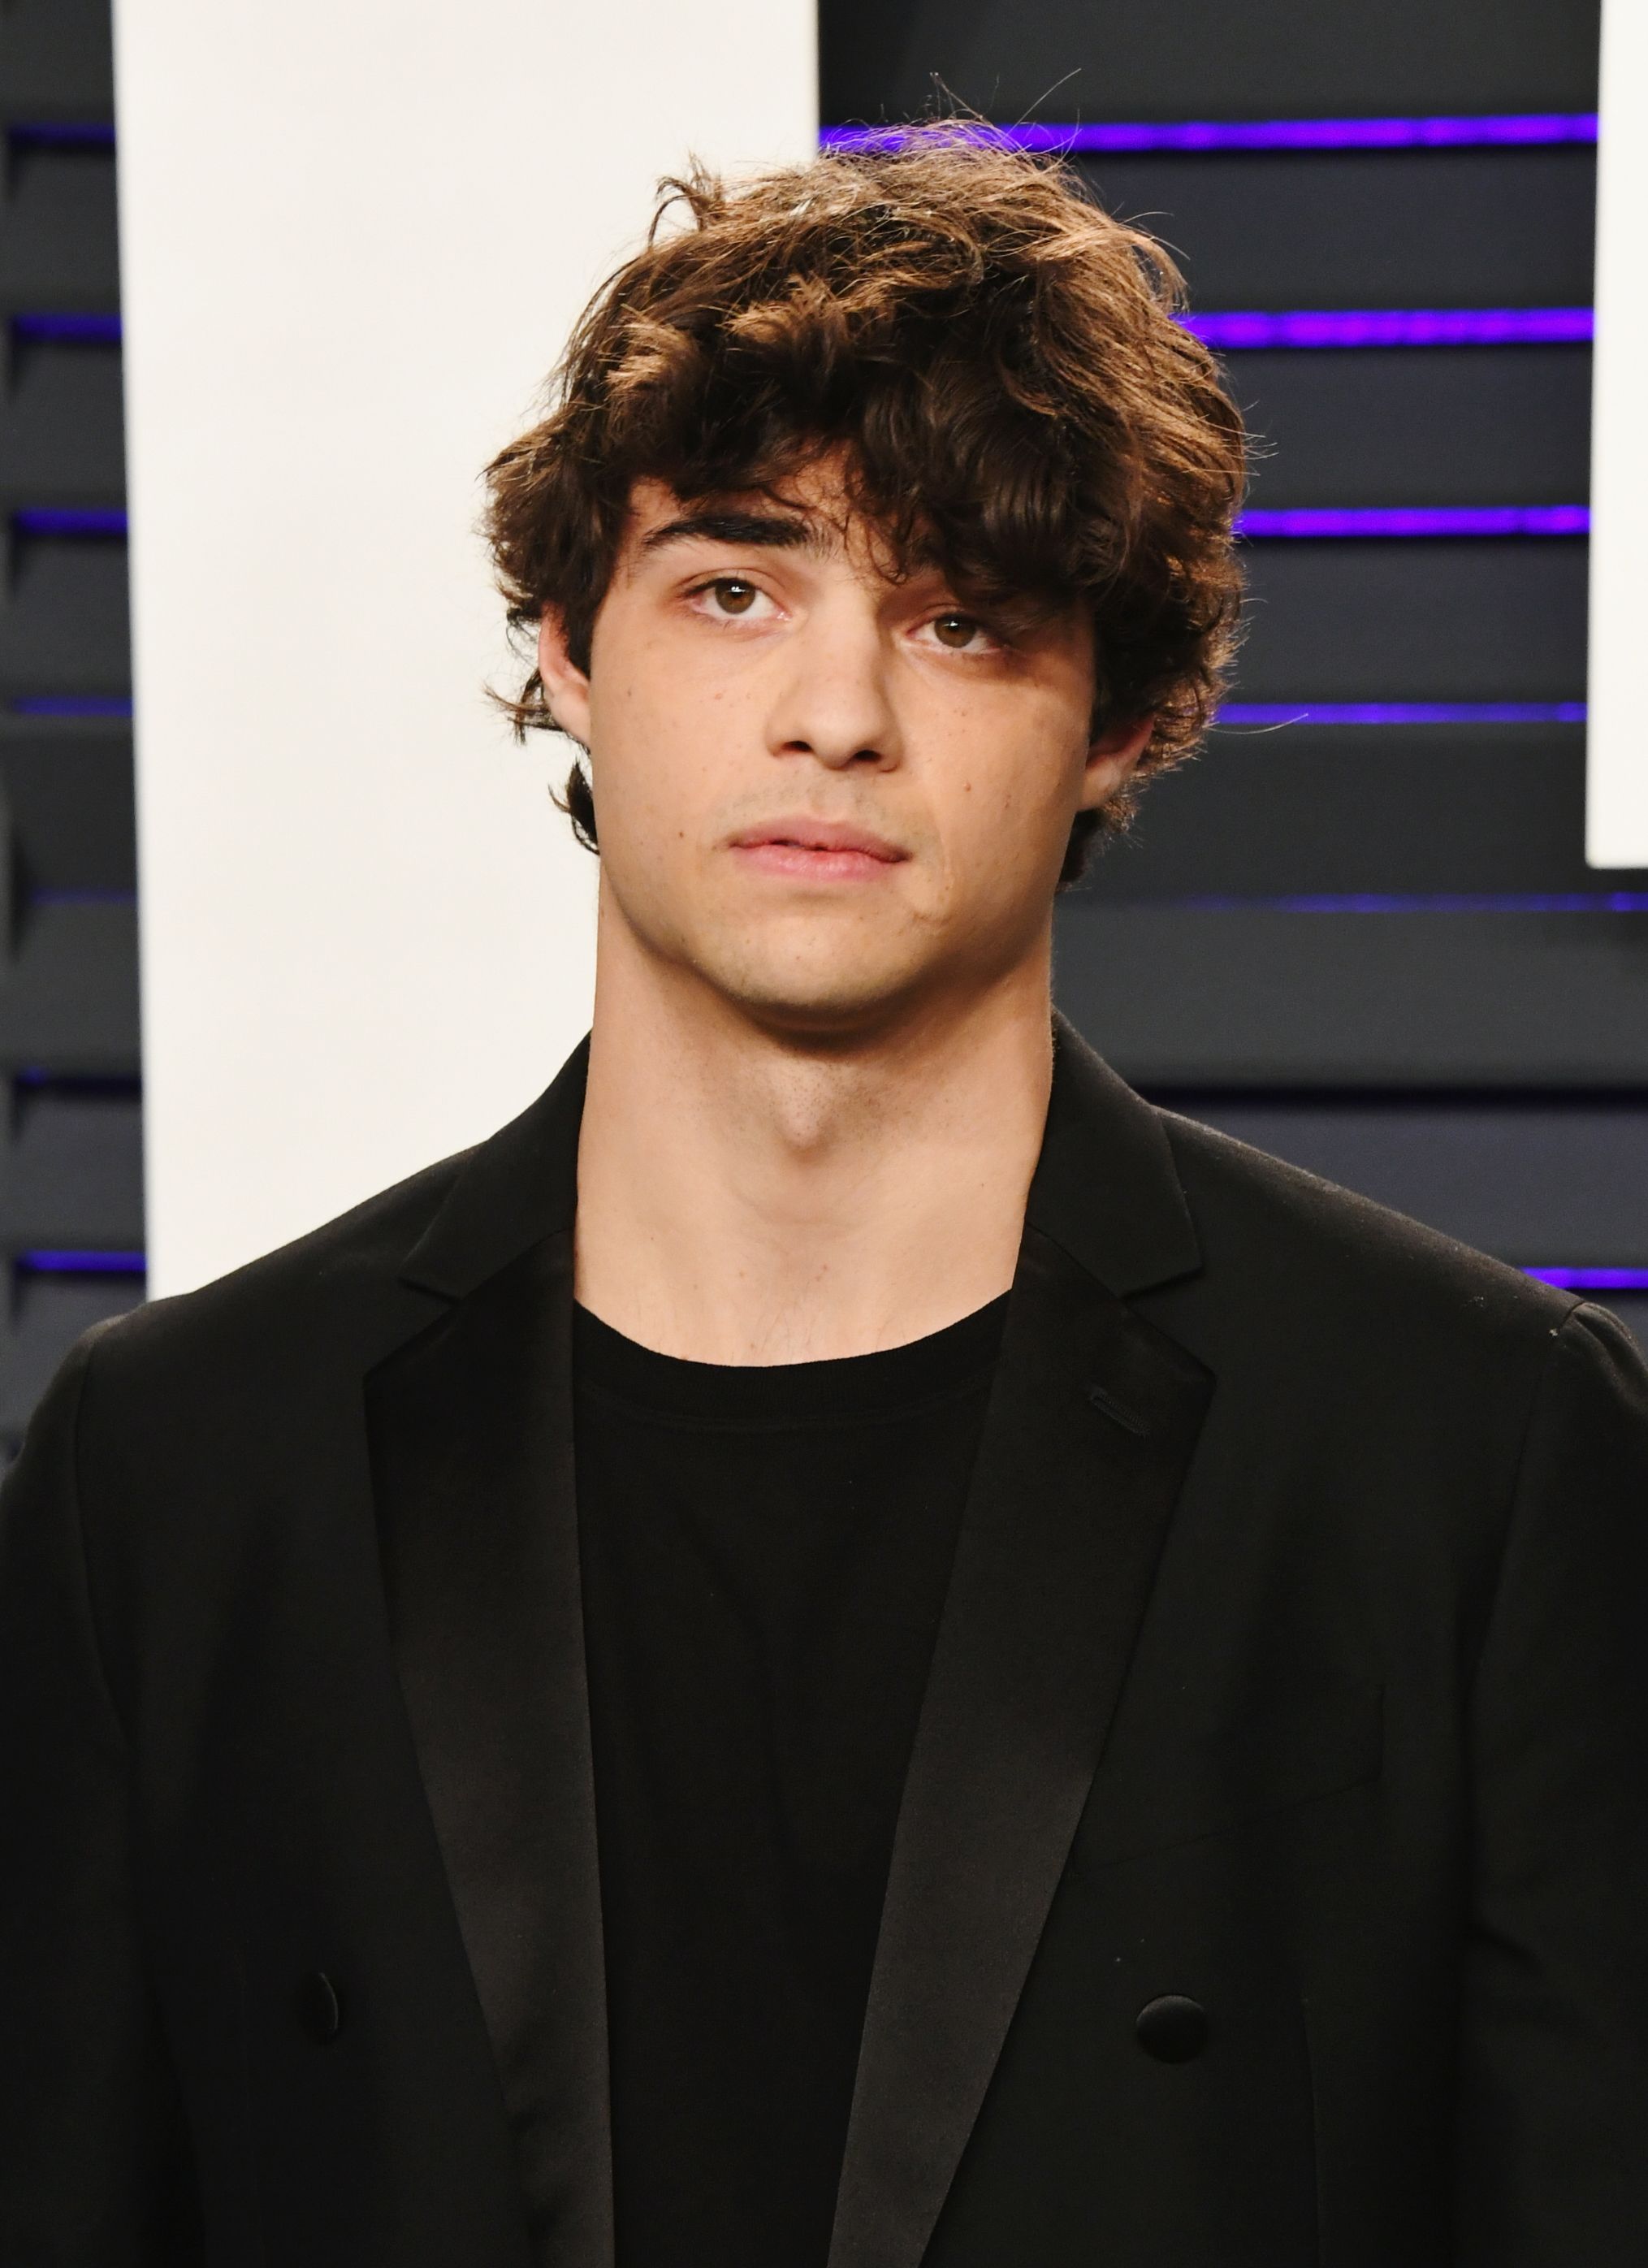 Noah Centineo Just Bleached His Beard and His Fans Are Upset